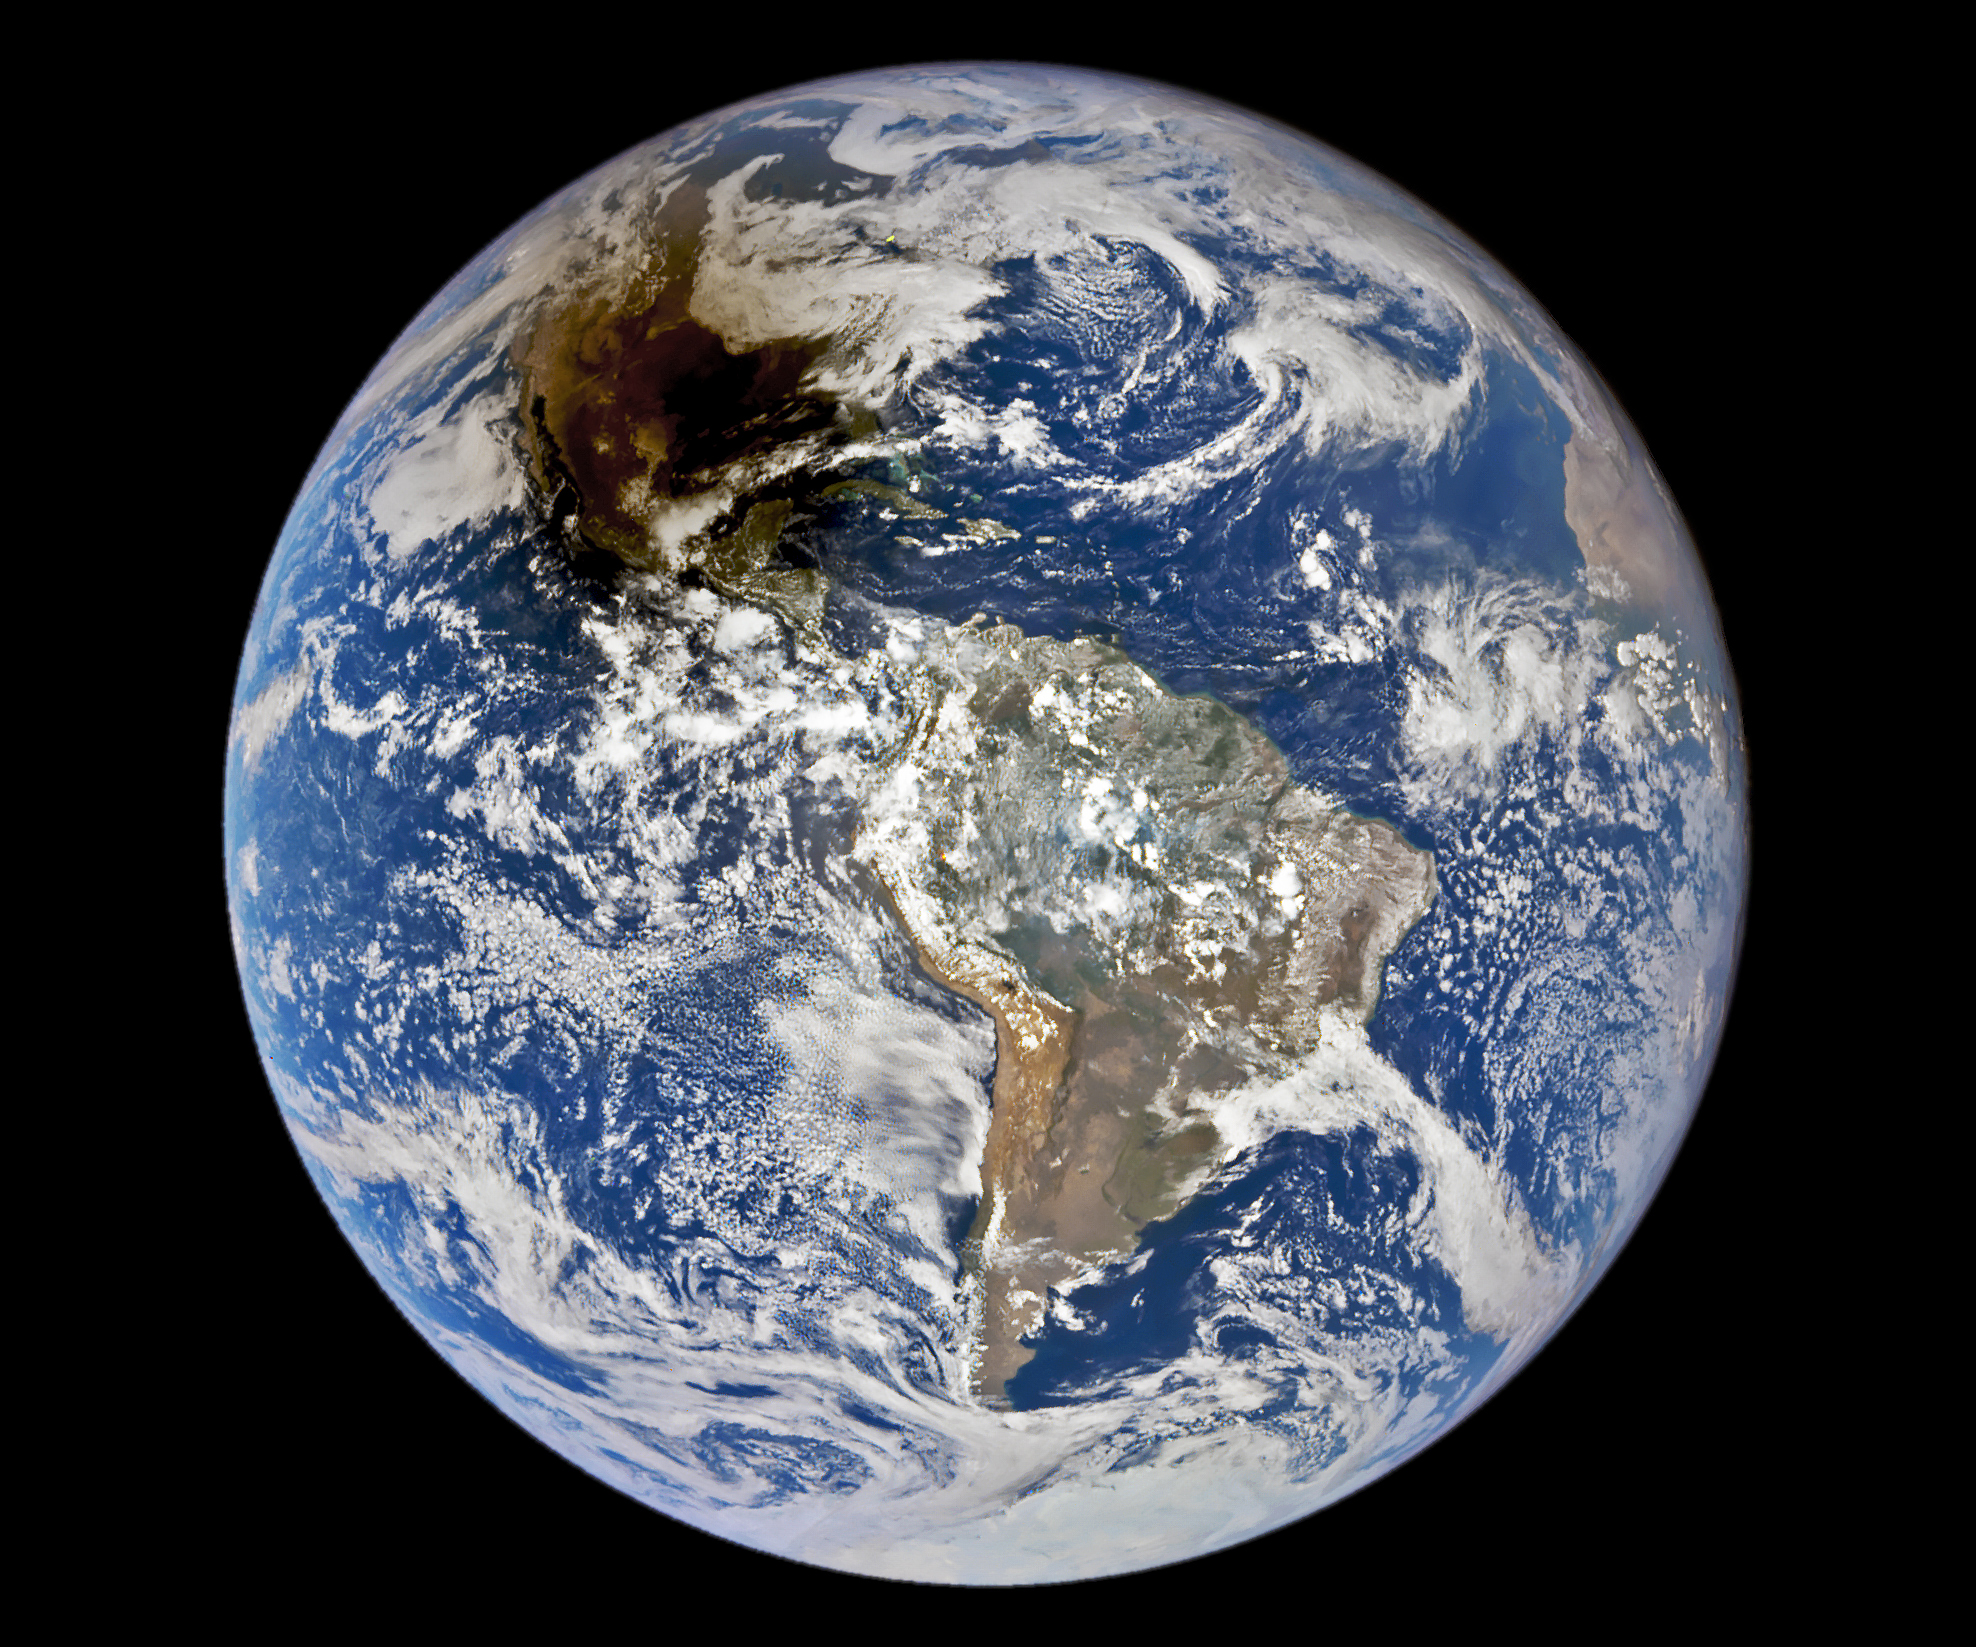 A full disc image of Earth in which North and South America are visible. The Moon casts a dark brown shadow in the top left quadrant.